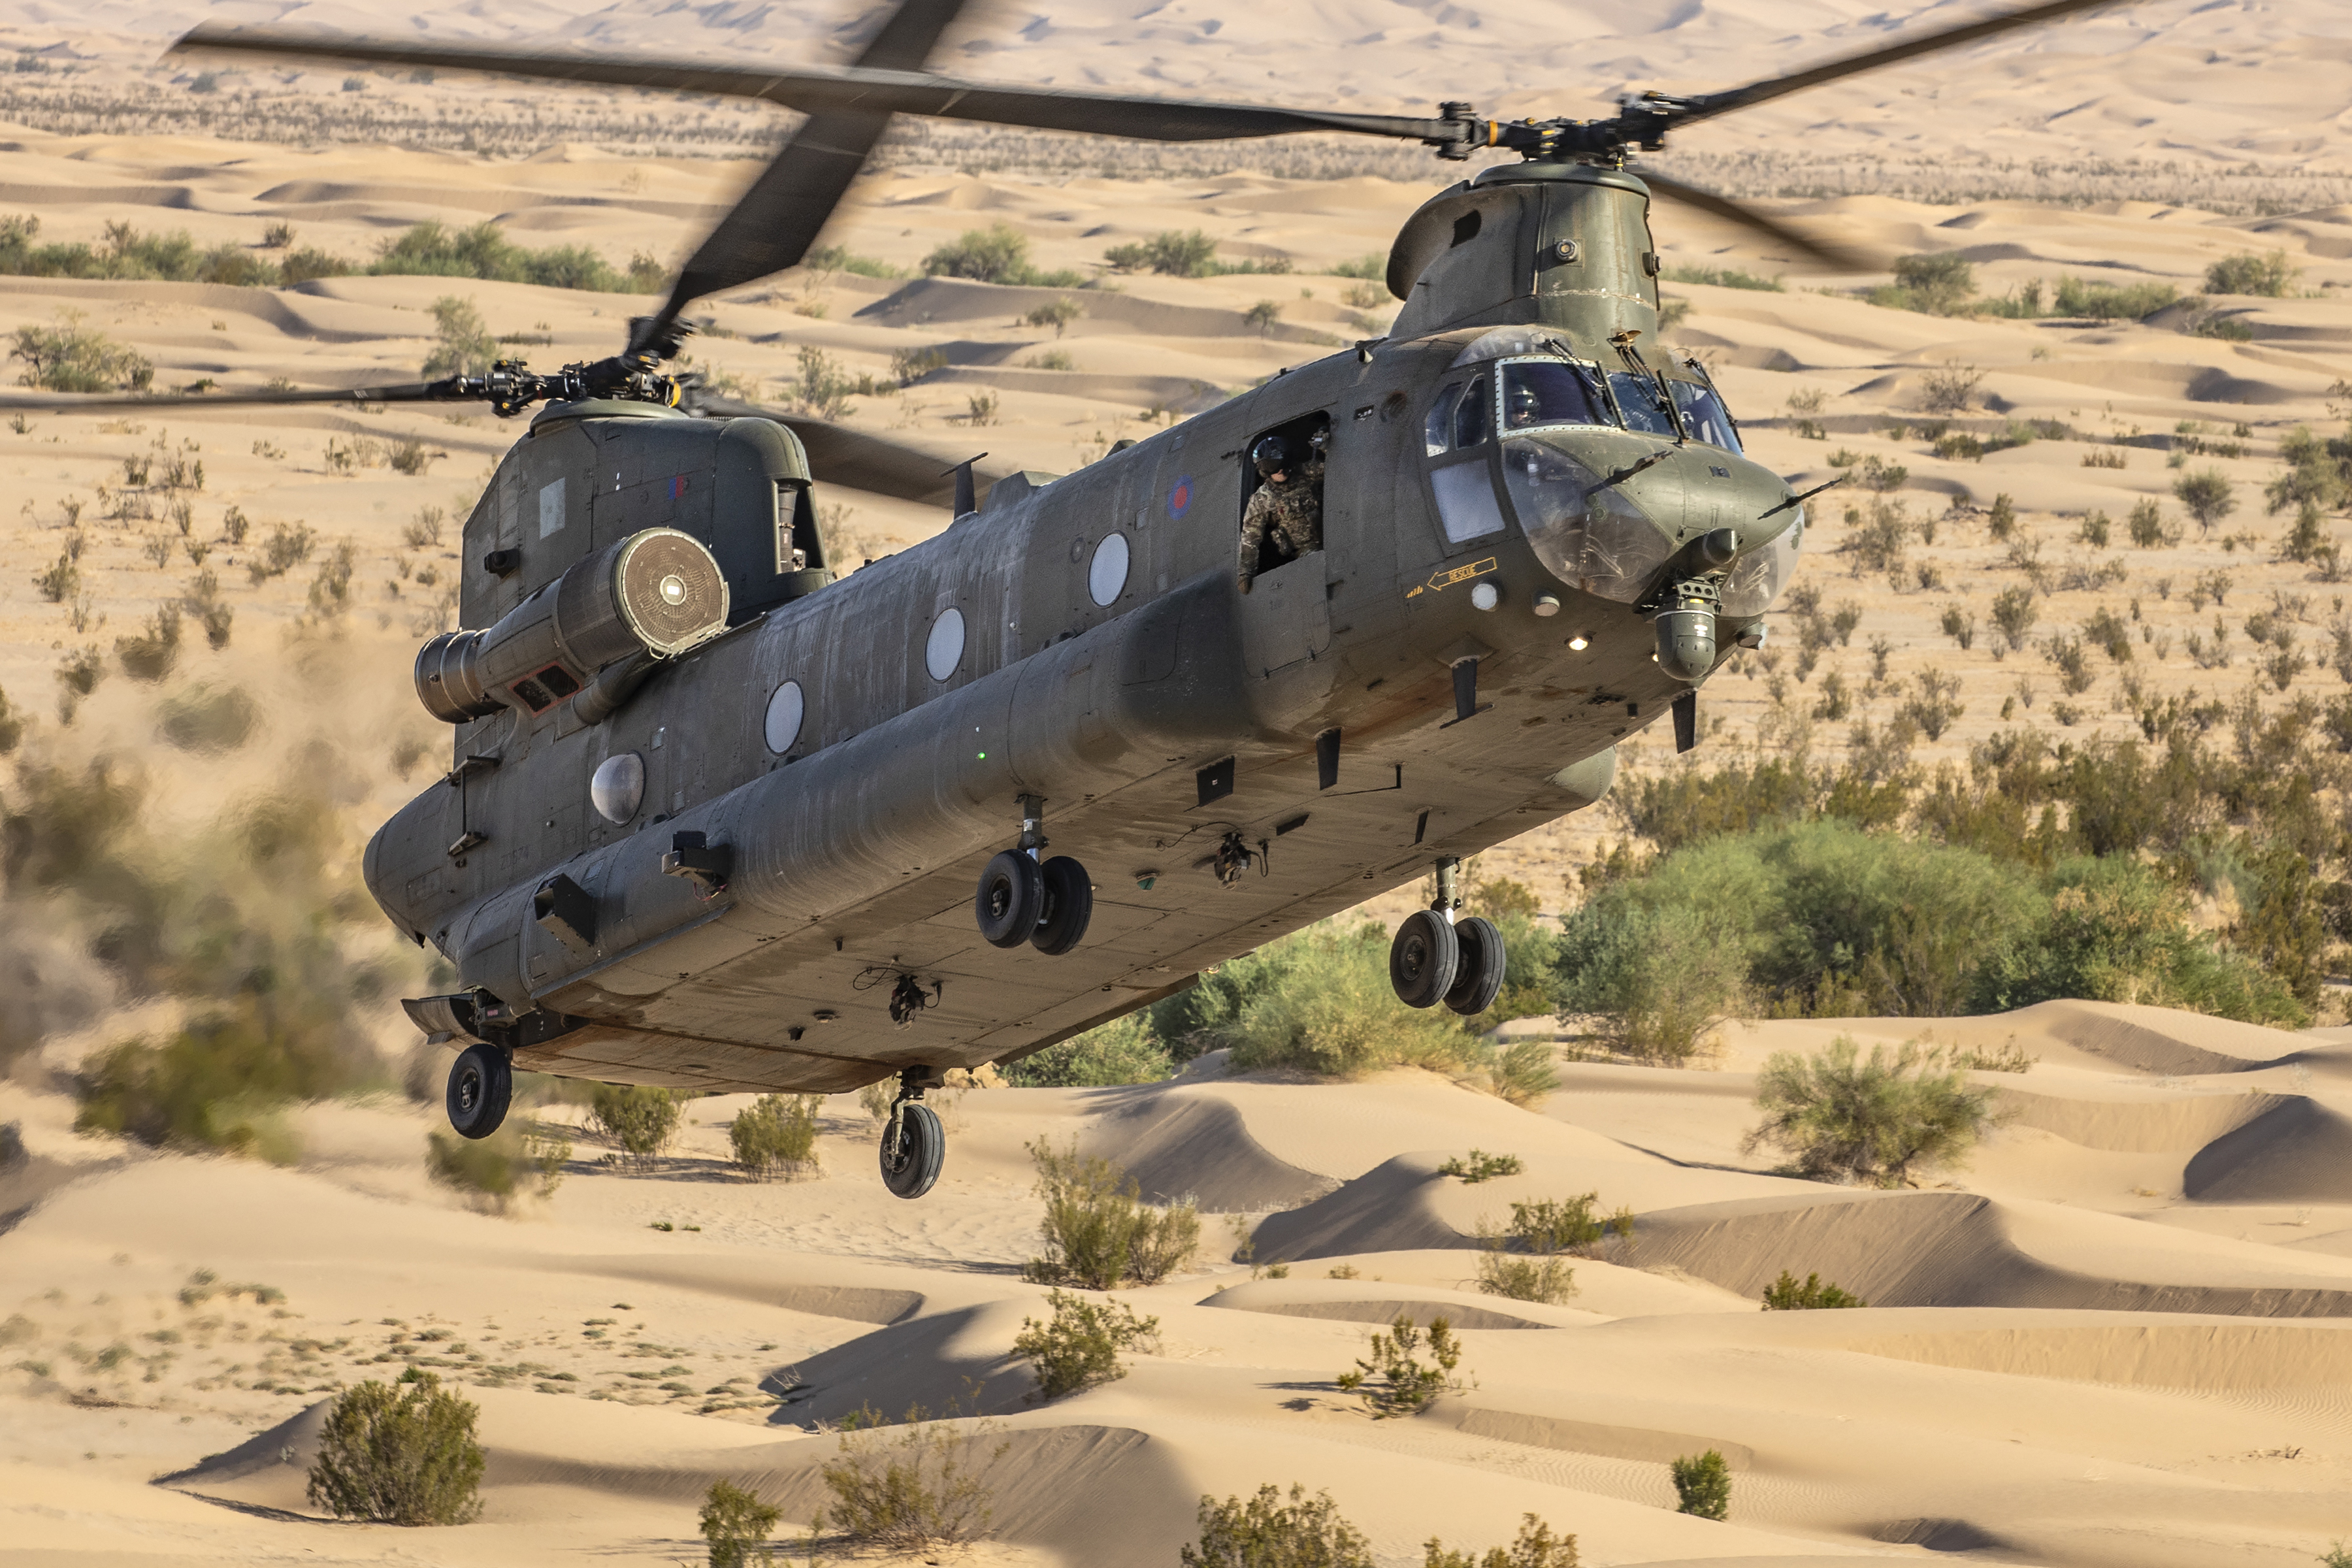 A Chinook hovering over the desert as it comes in to land.